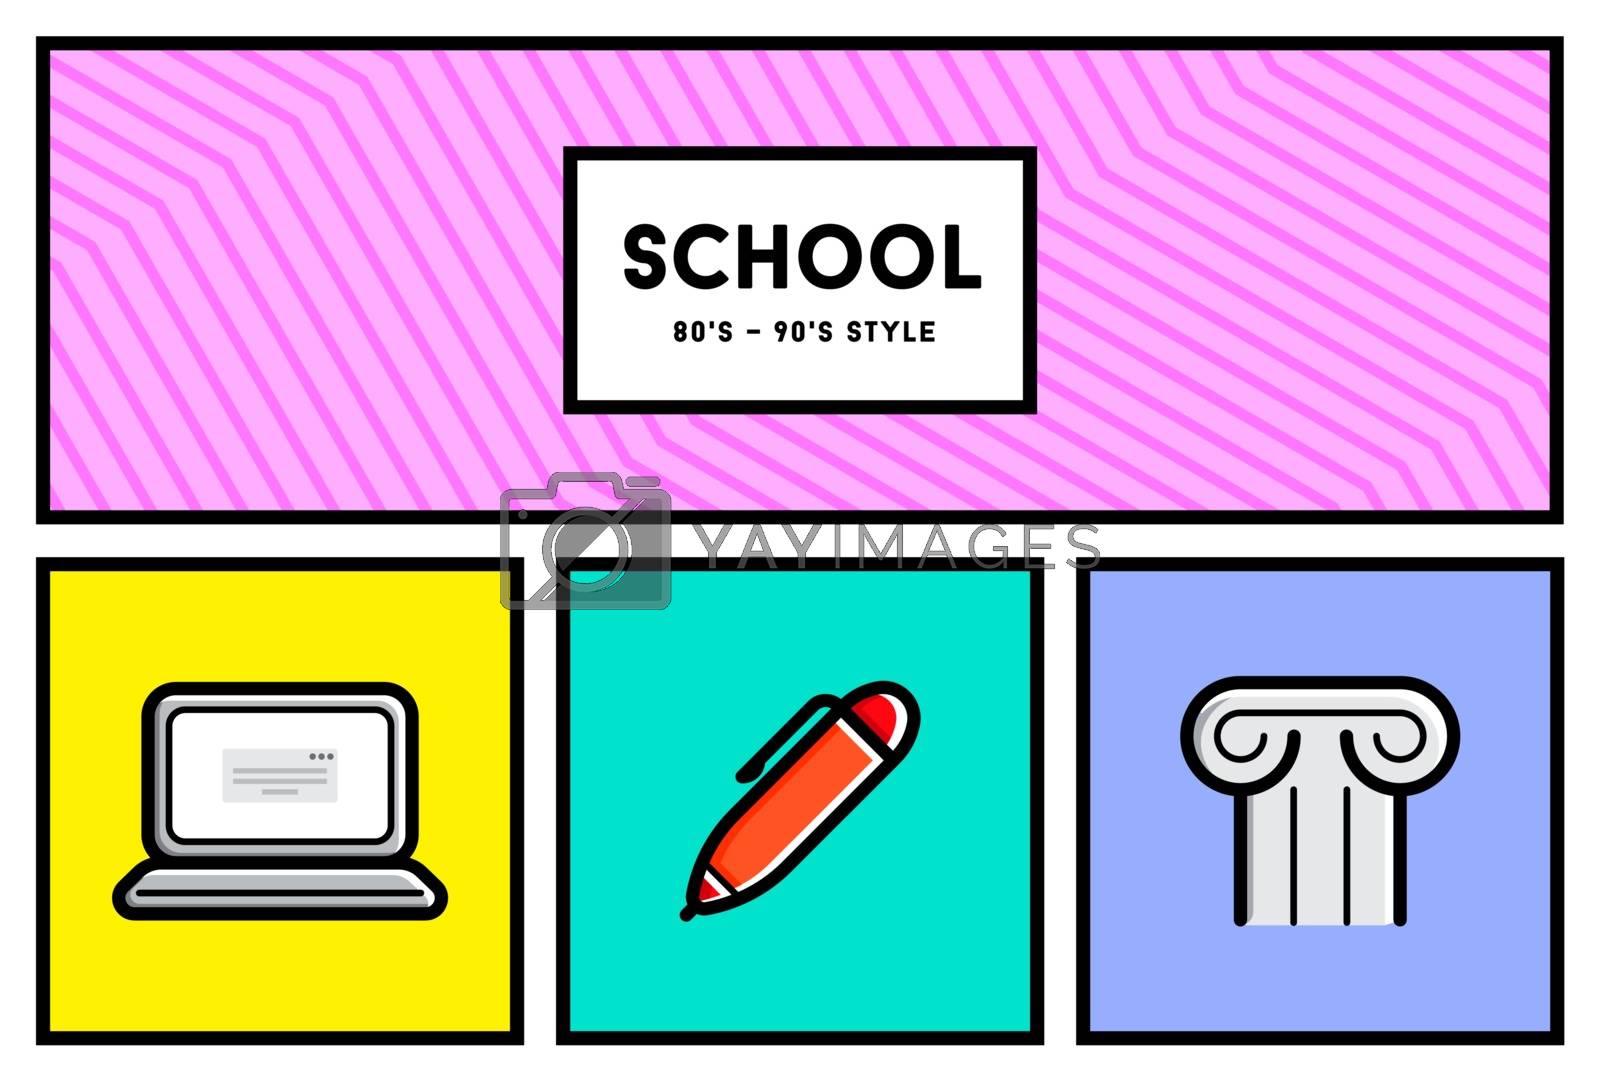 Royalty free image of Vector 80's or 90's Stylish School Education Icon Set with Retro by ckybes